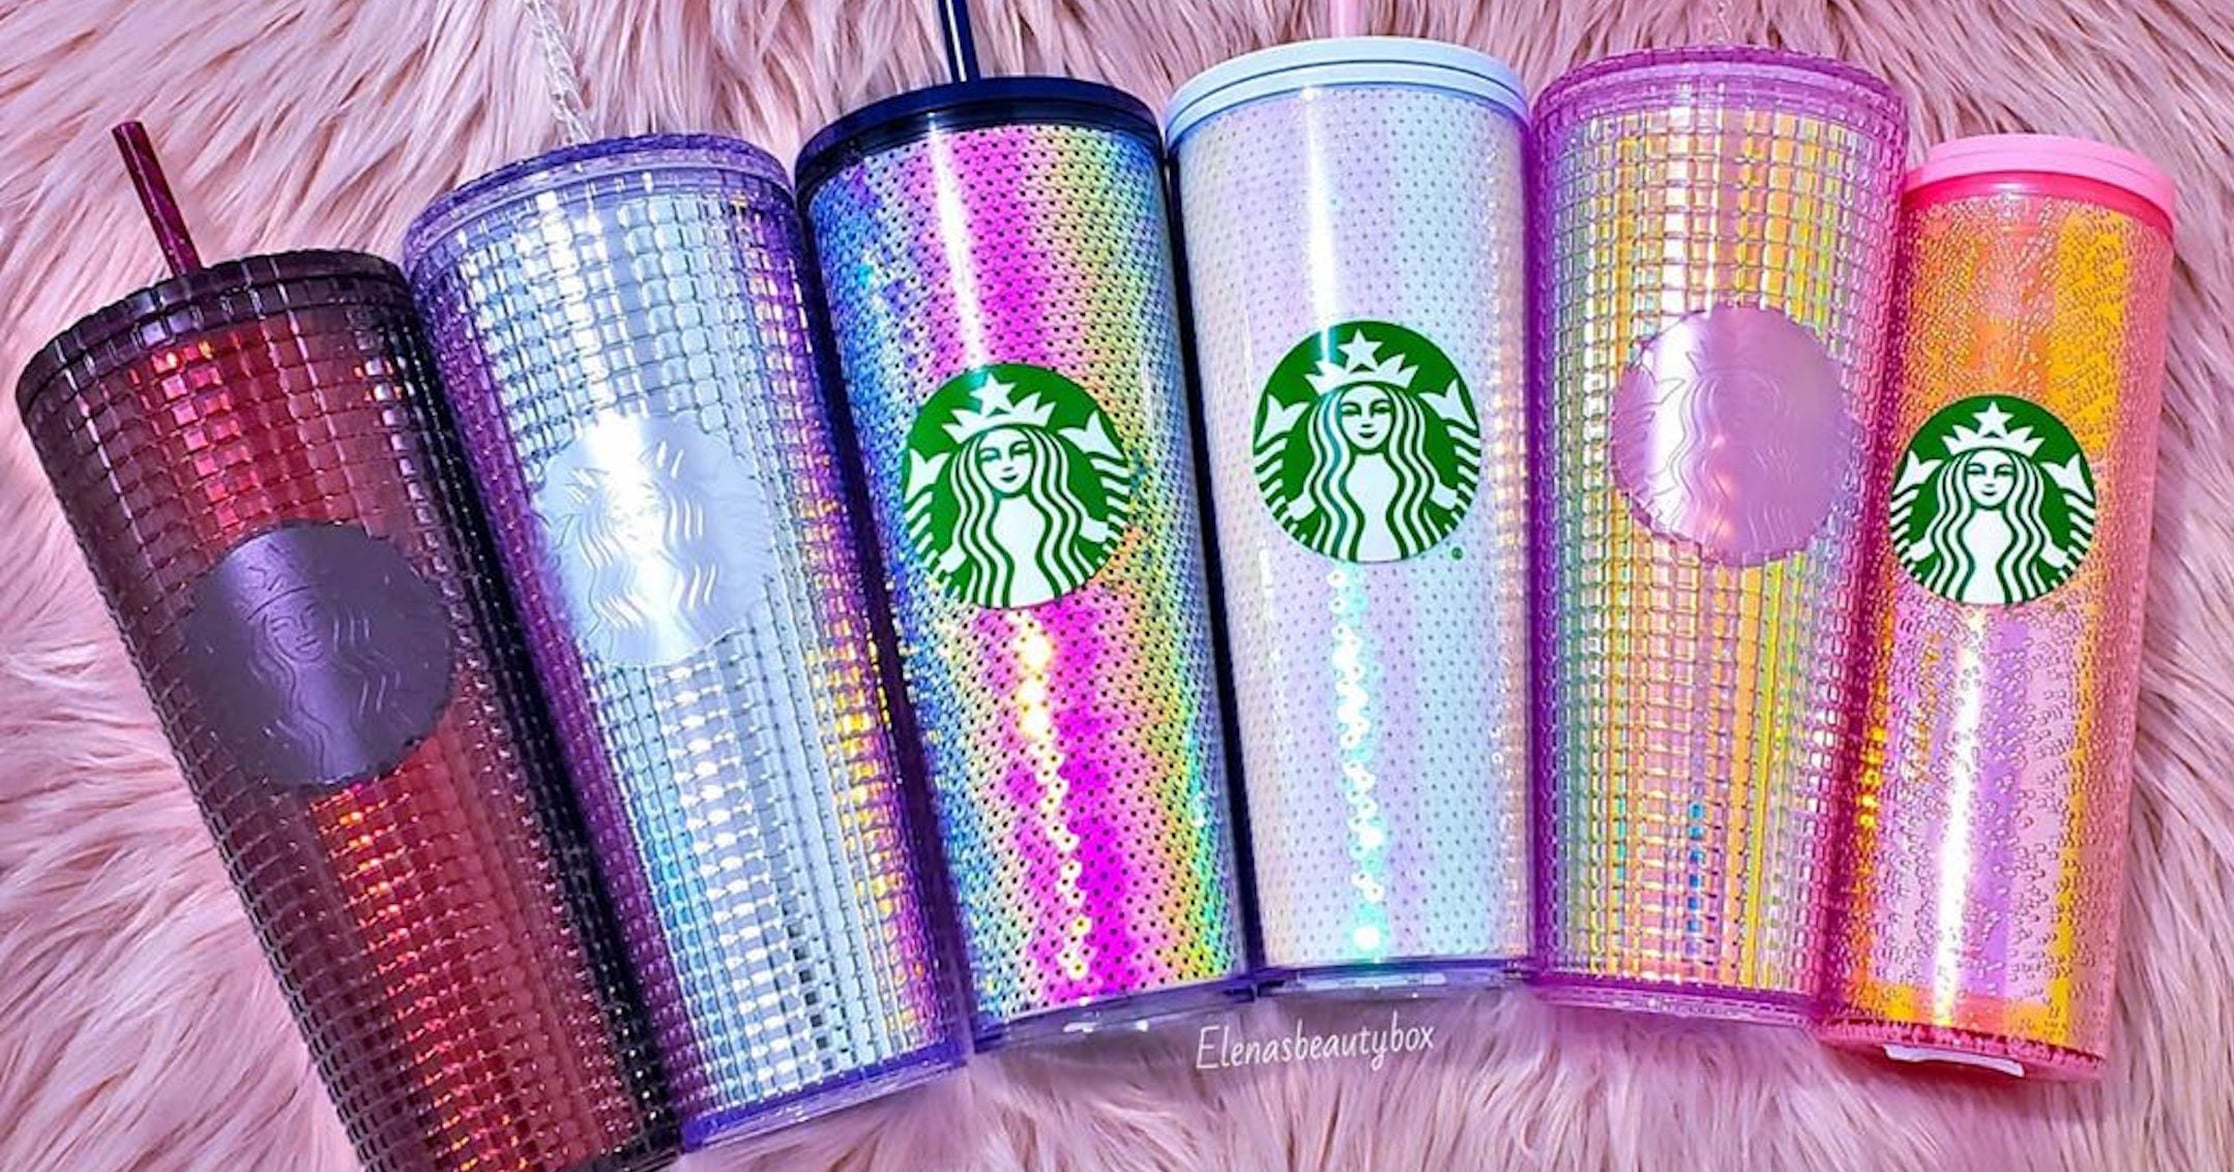 Portable Reusable PP Straw Cup Water Bottle Cup with straw Sequined Glitter  Drinking Cup Juice tumbler Cup Straw Mug Drinkware